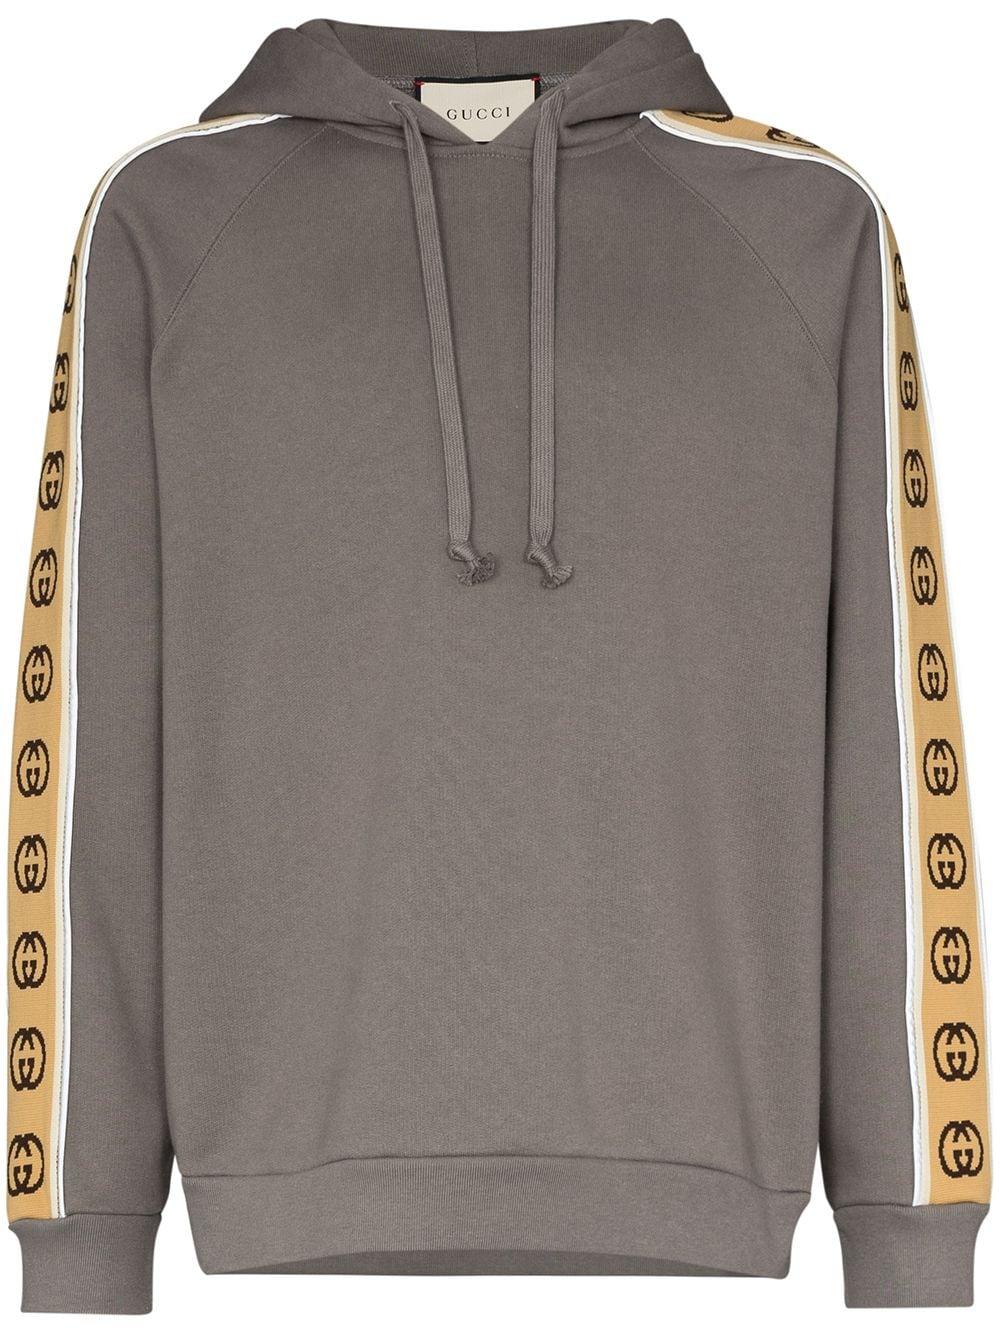 Gucci Synthetic Logo Tape Hoodie in Grey (Gray) for Men - Lyst